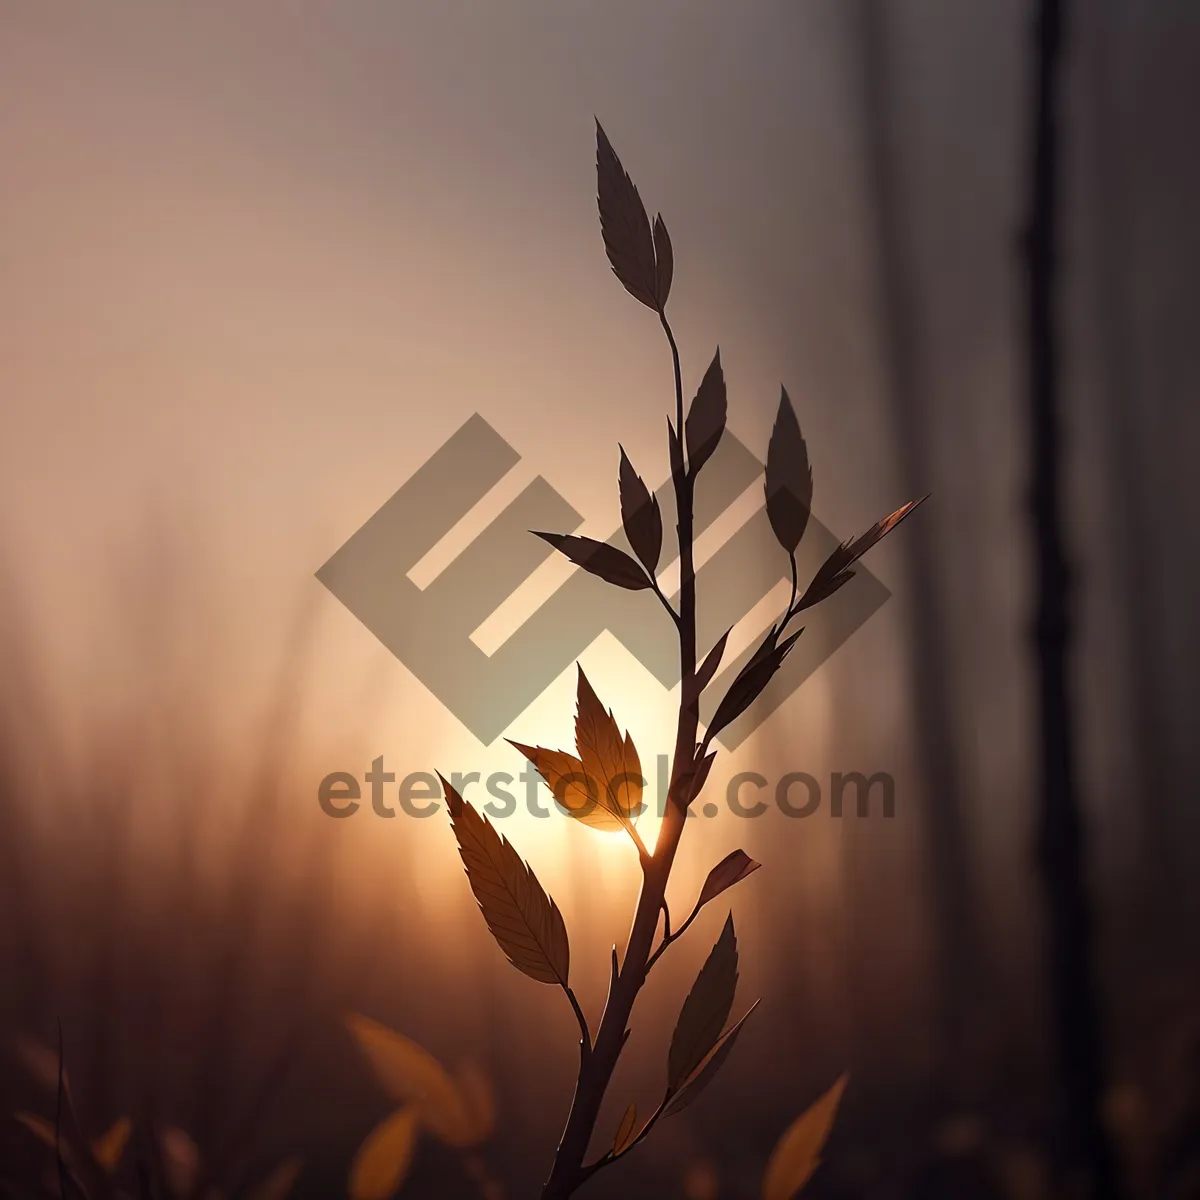 Picture of Bamboo Silhouette amidst Sunlit Wheat Field